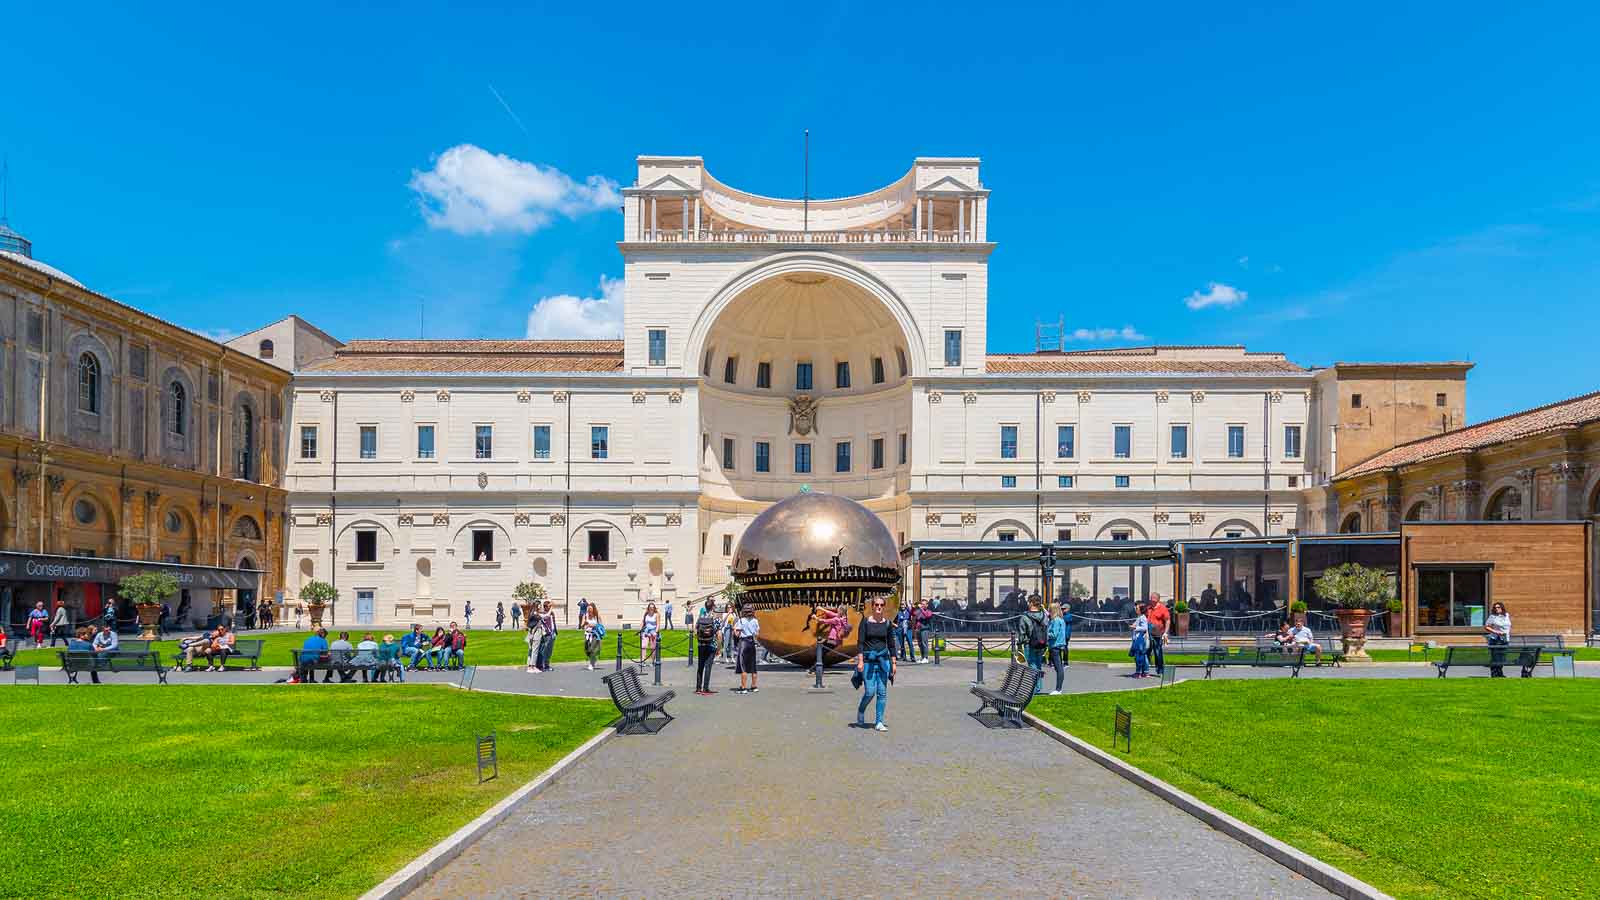 How To Avoid The Long Lines At Vatican Museums in Rome, Italy 2